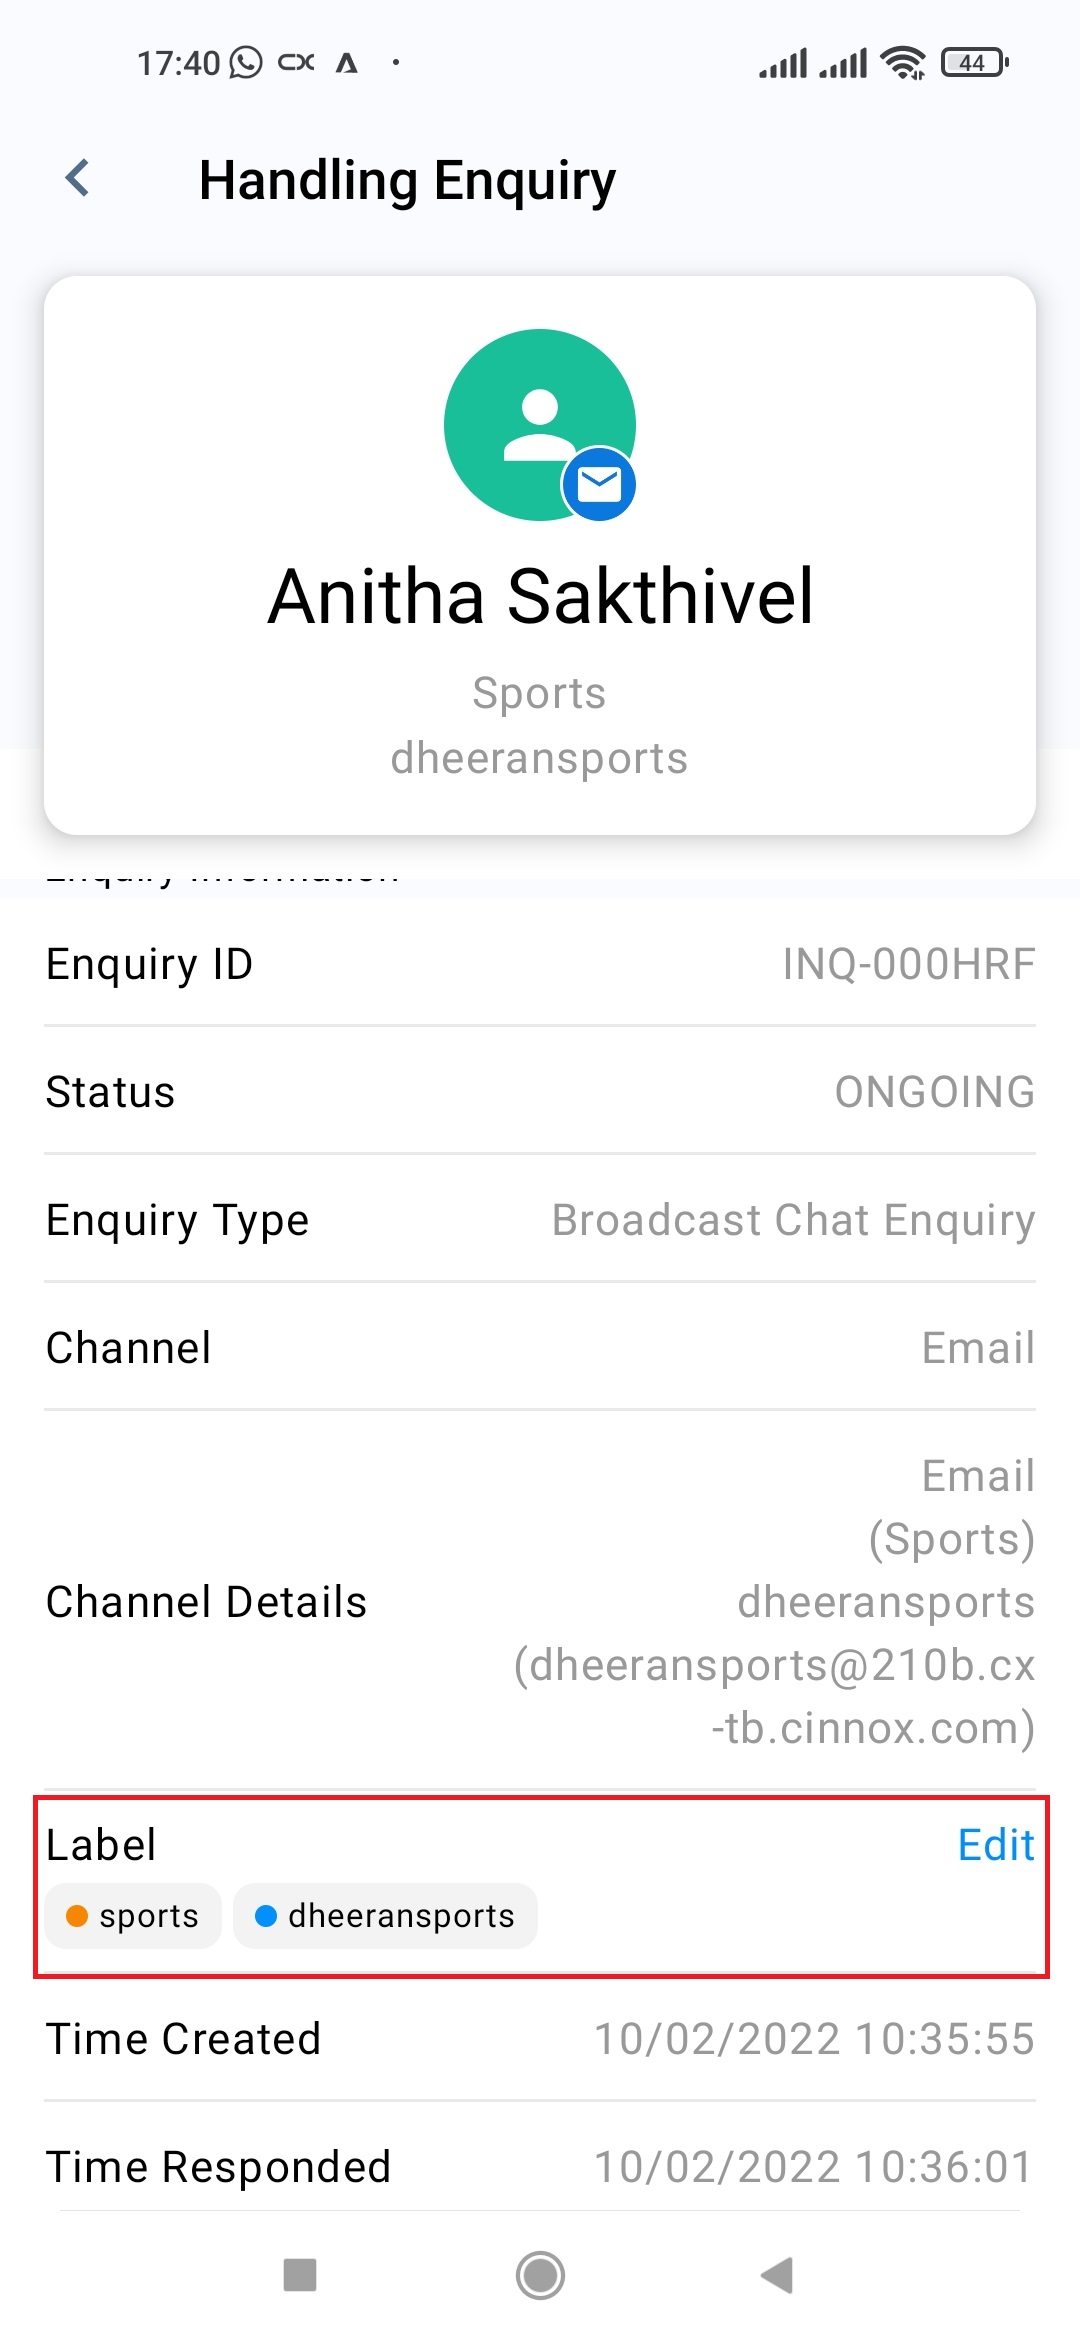 Add Label in the Enquiry Overview